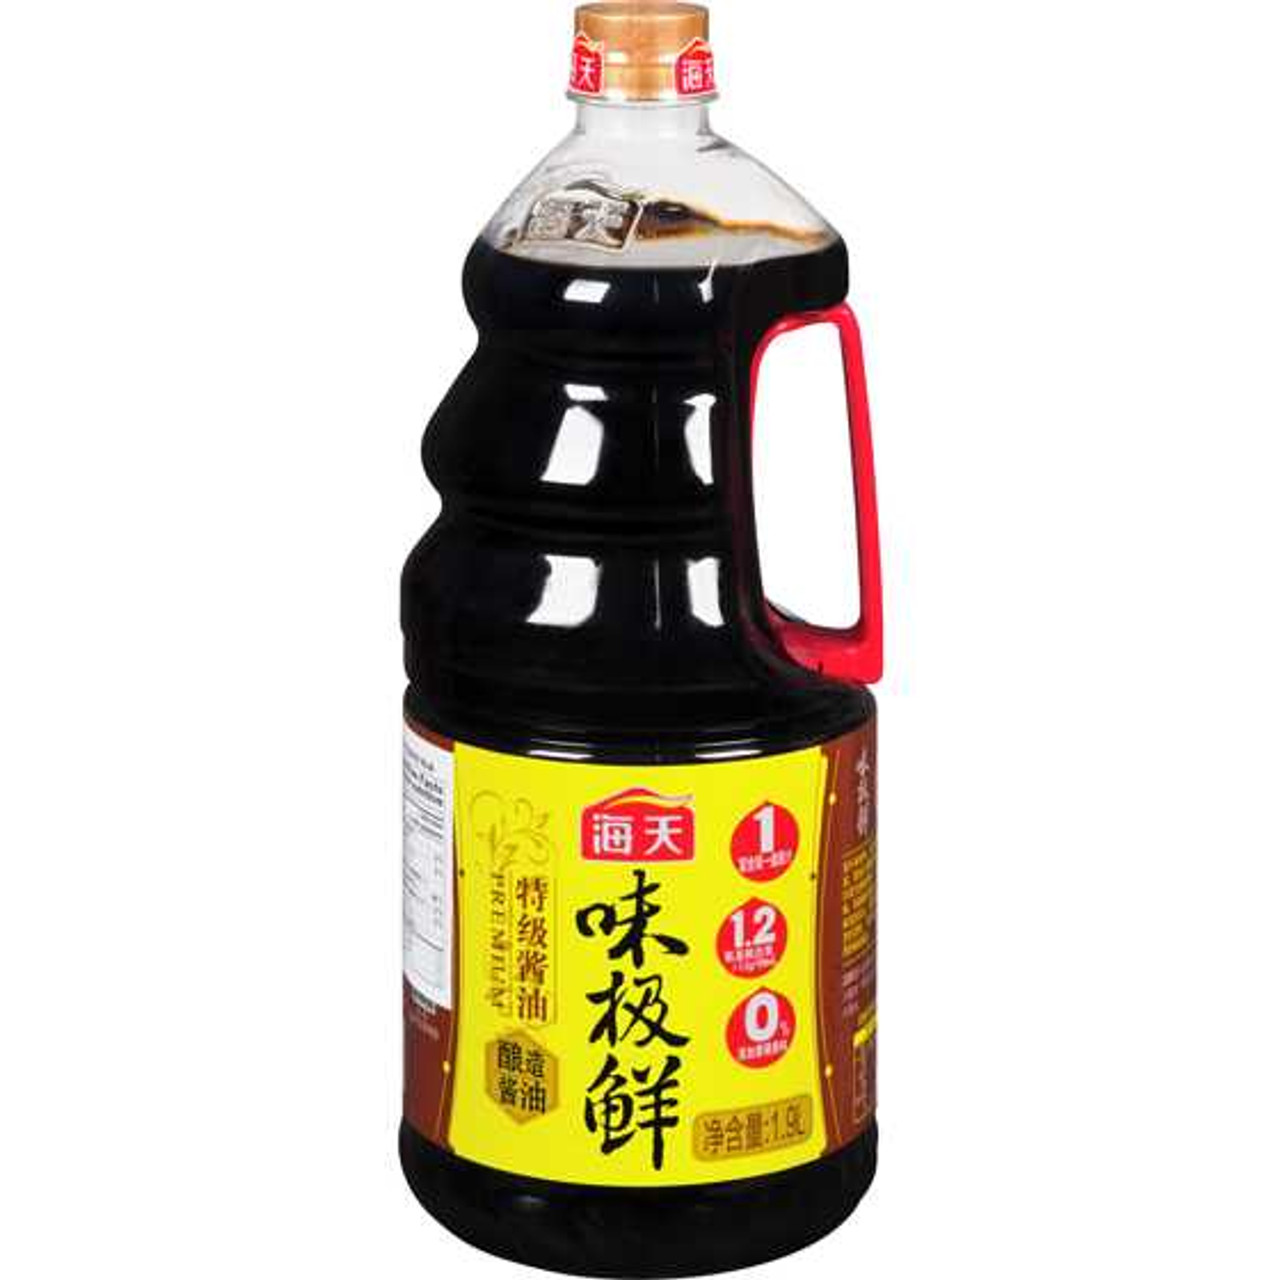 HADAY Seasoning Soy Sauce 1.9Litre Haday Chicken Pieces